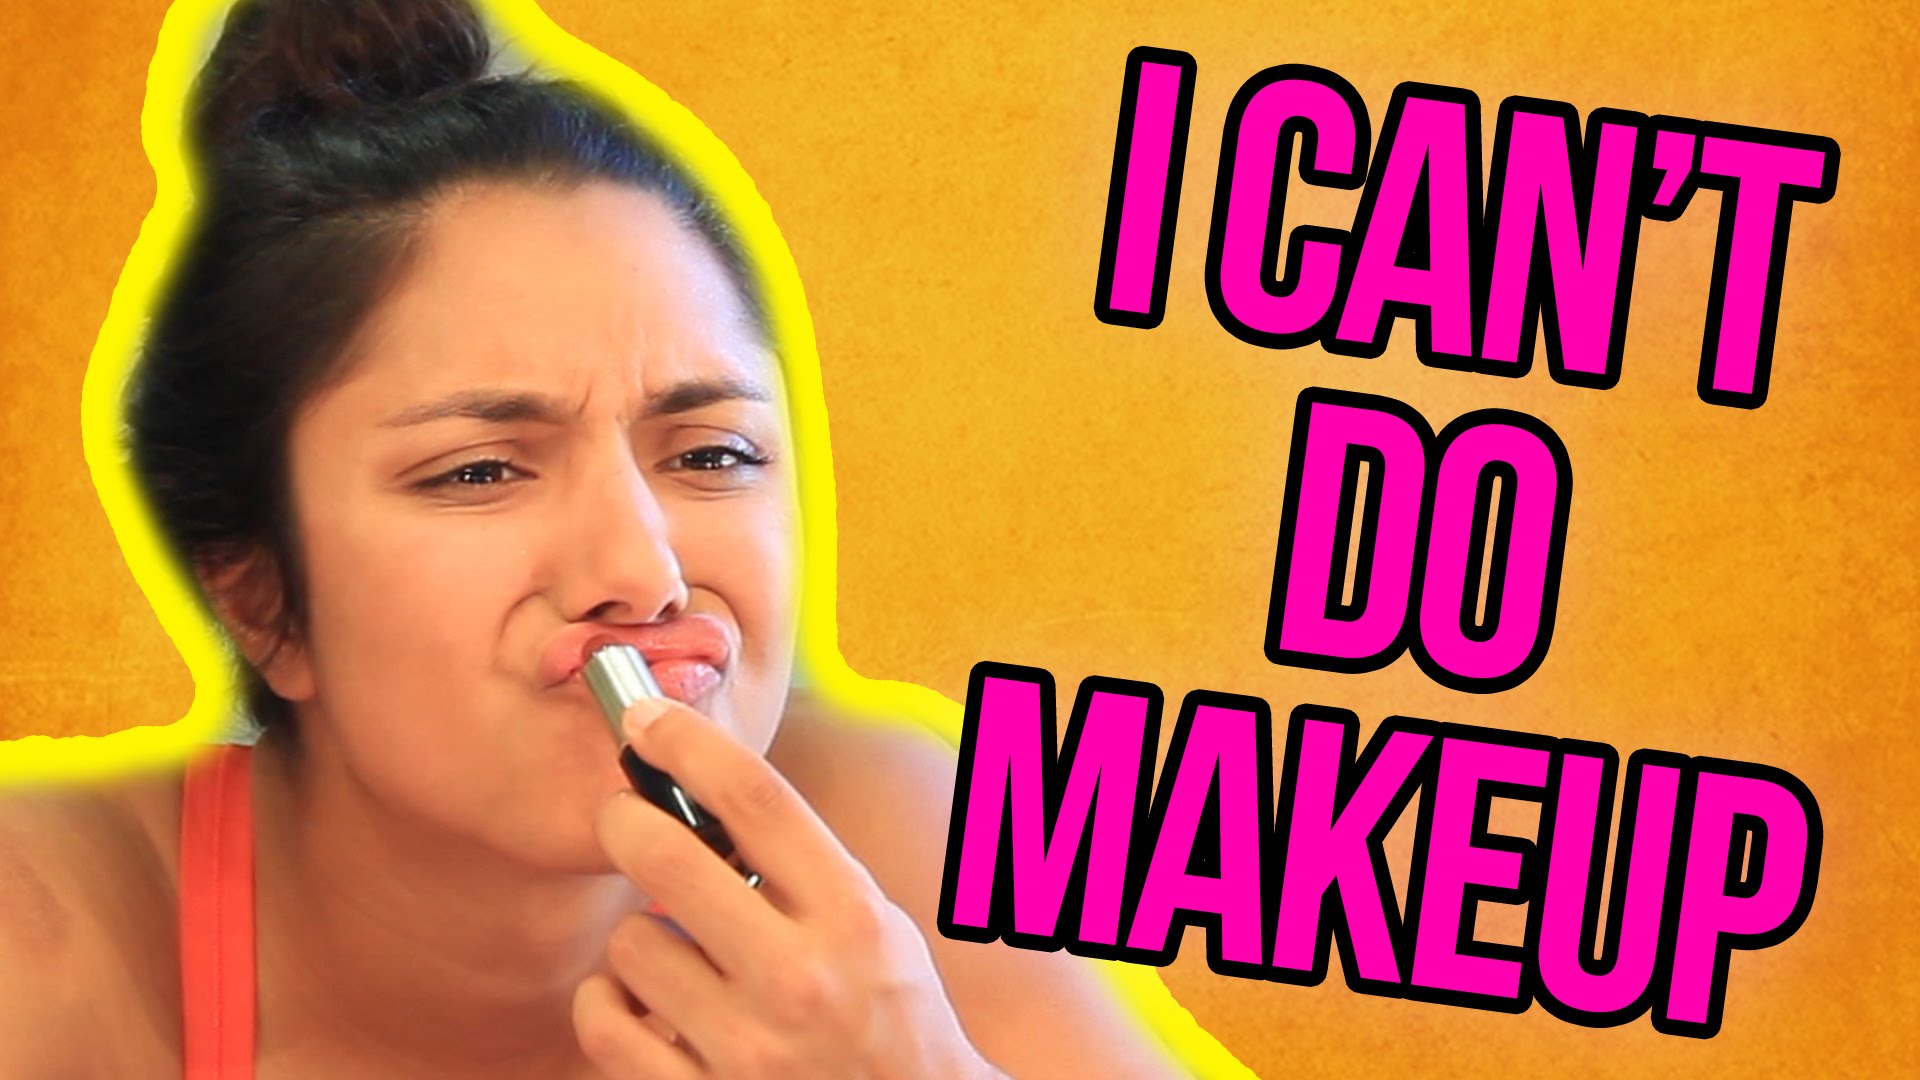 Girly girl - make up issues